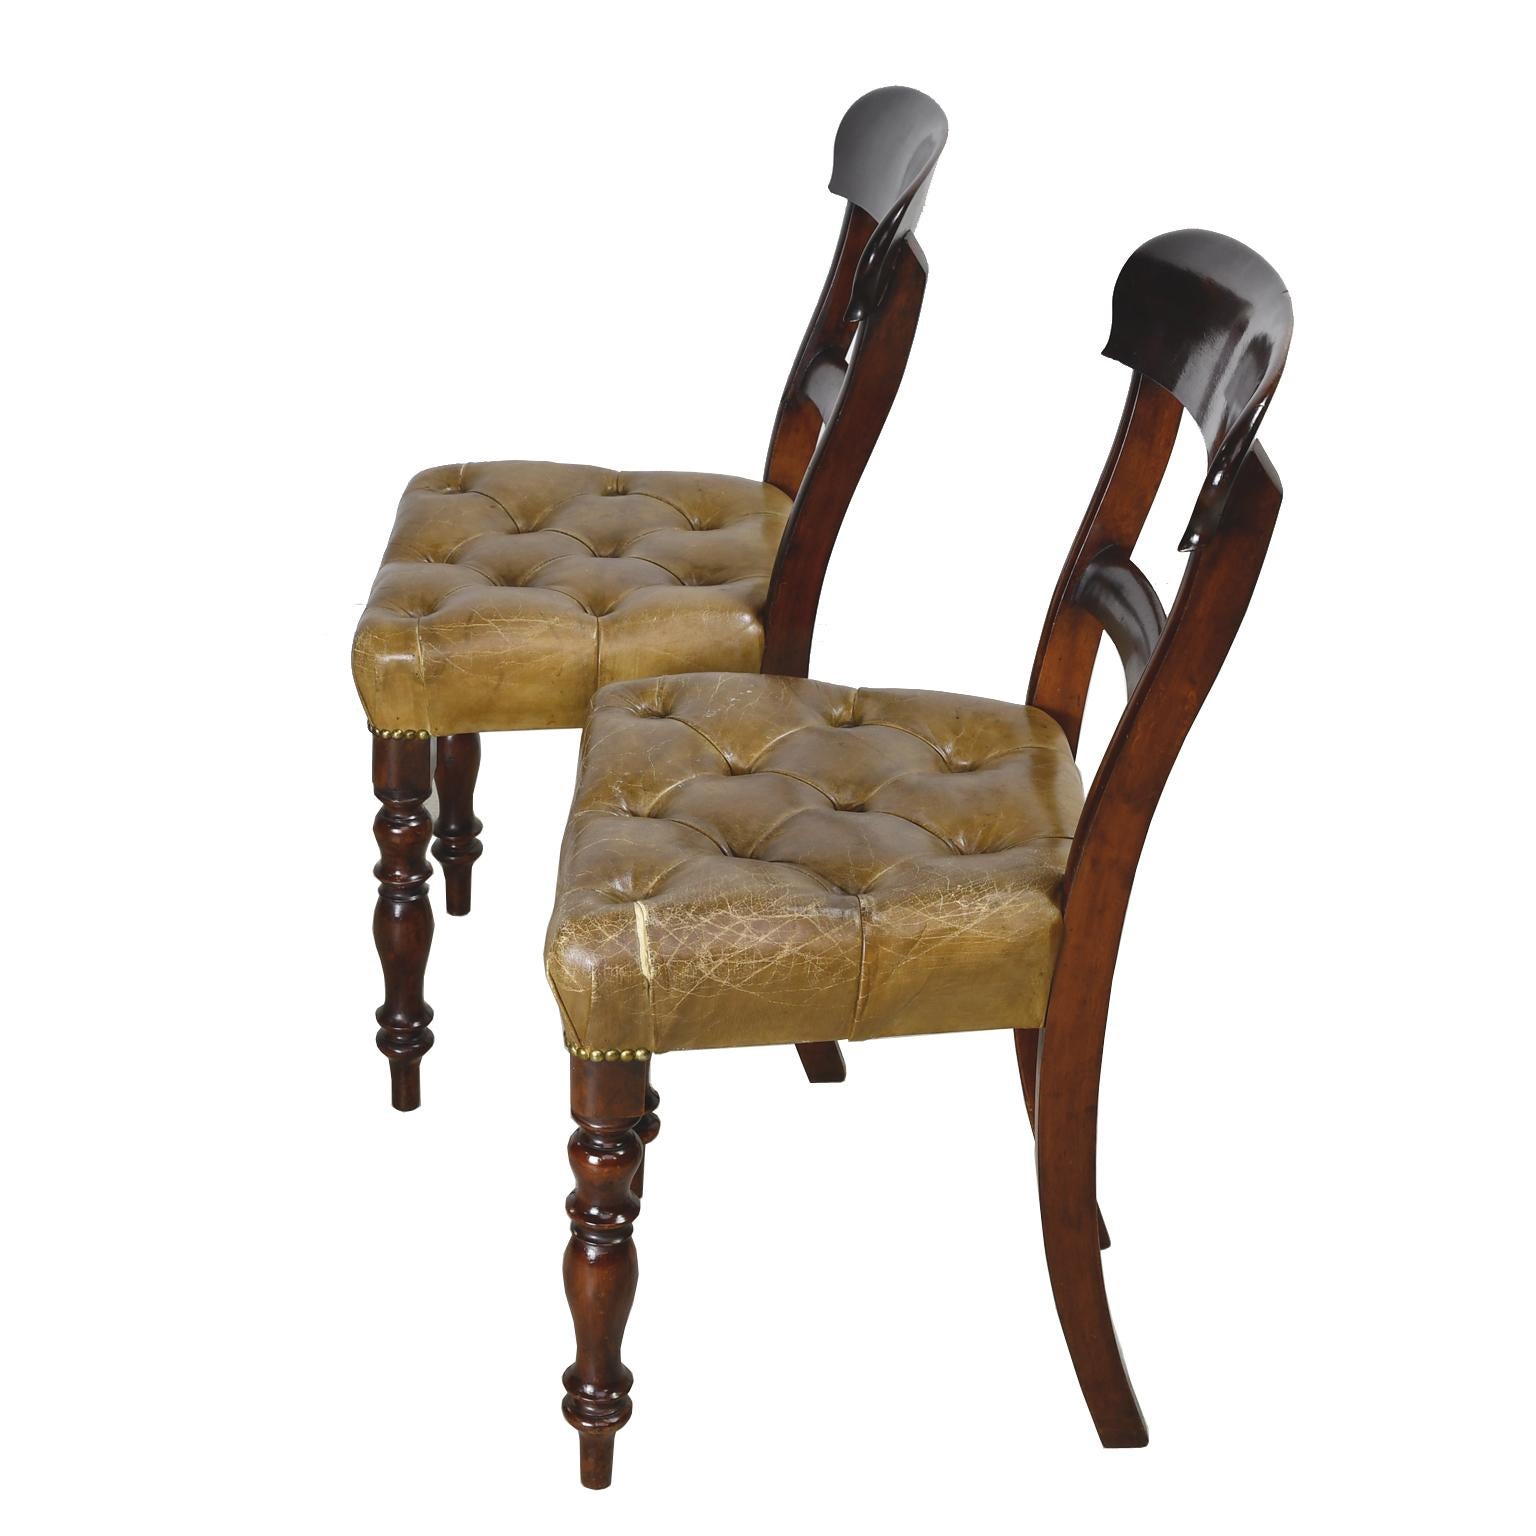 Mid-19th Century Pair of Early Victorian Mahogany Chairs with Leather Upholstery, England